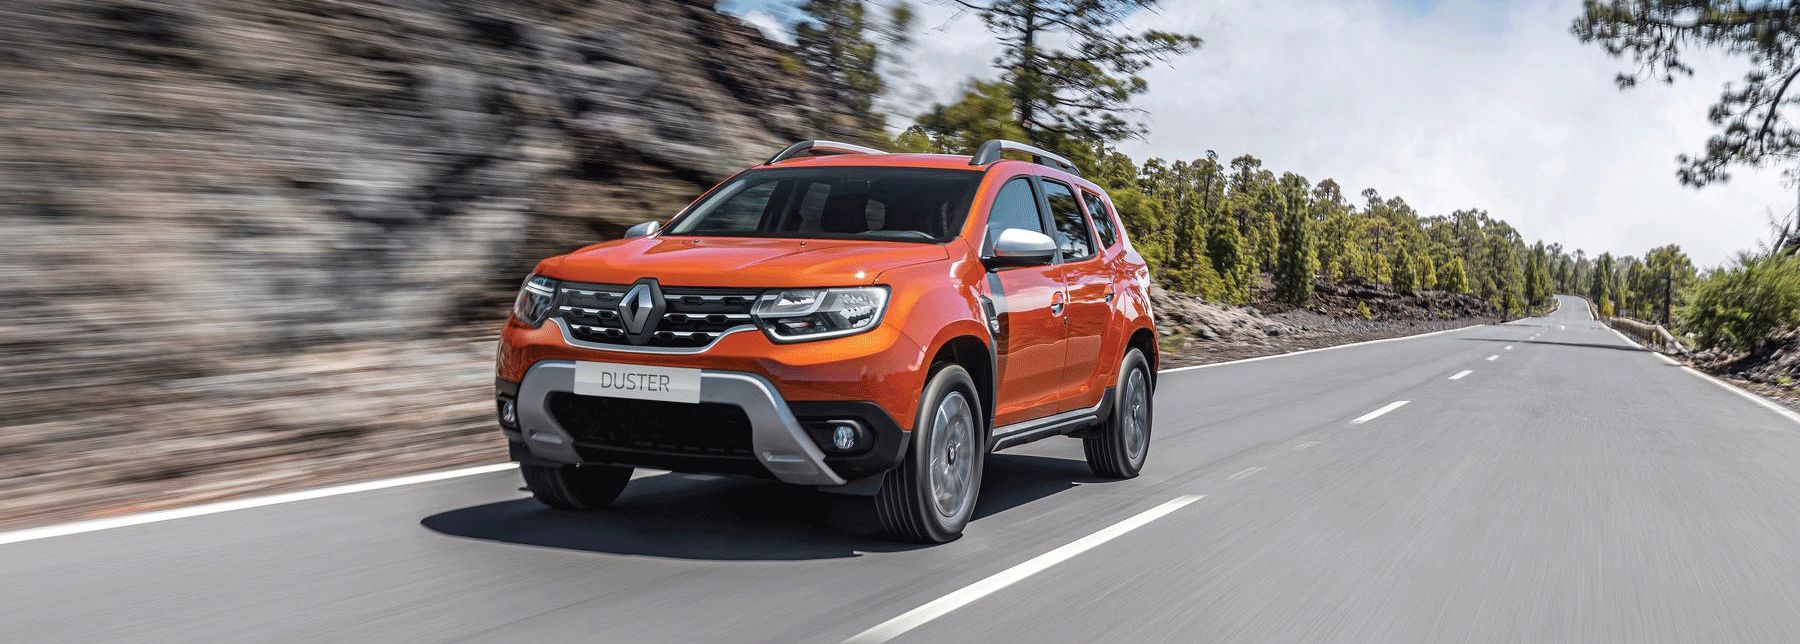 Updated Renault Duster now available